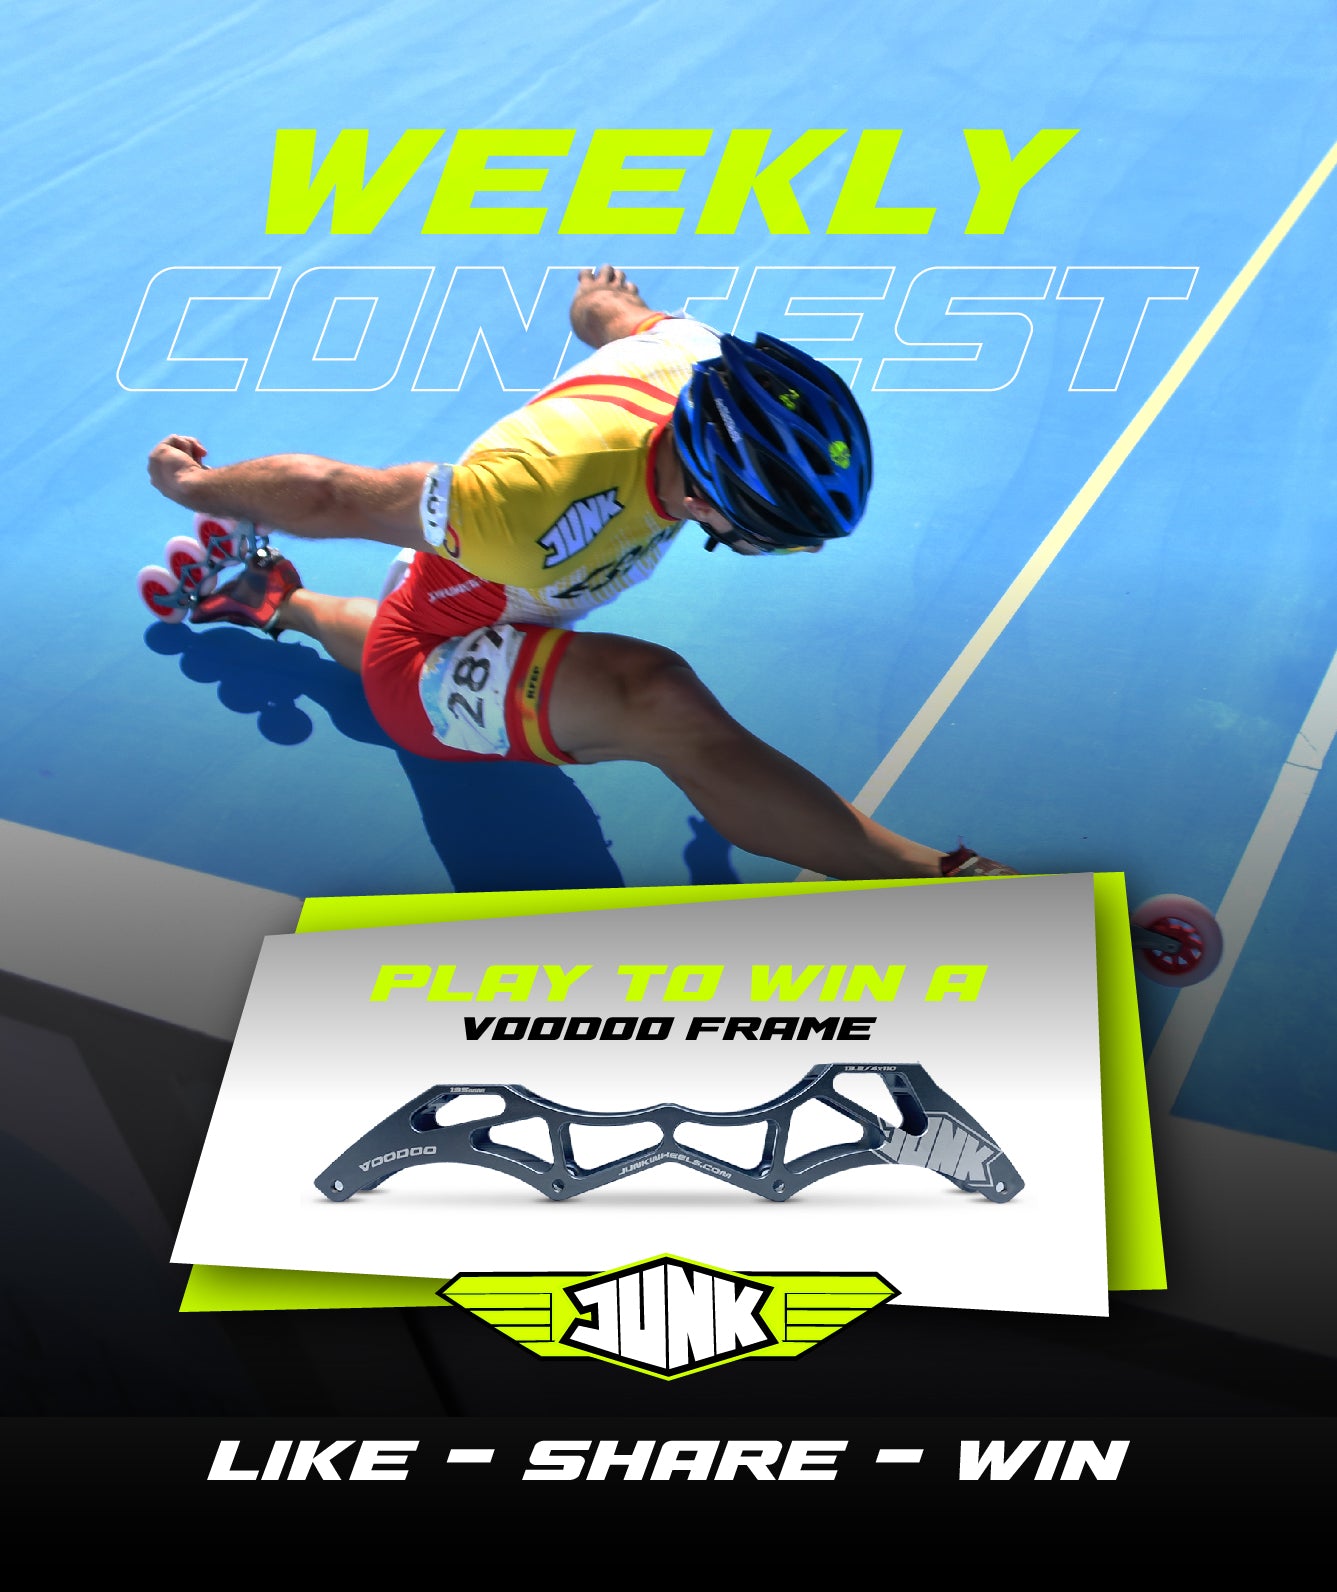 Junk Skates Weekly Contest